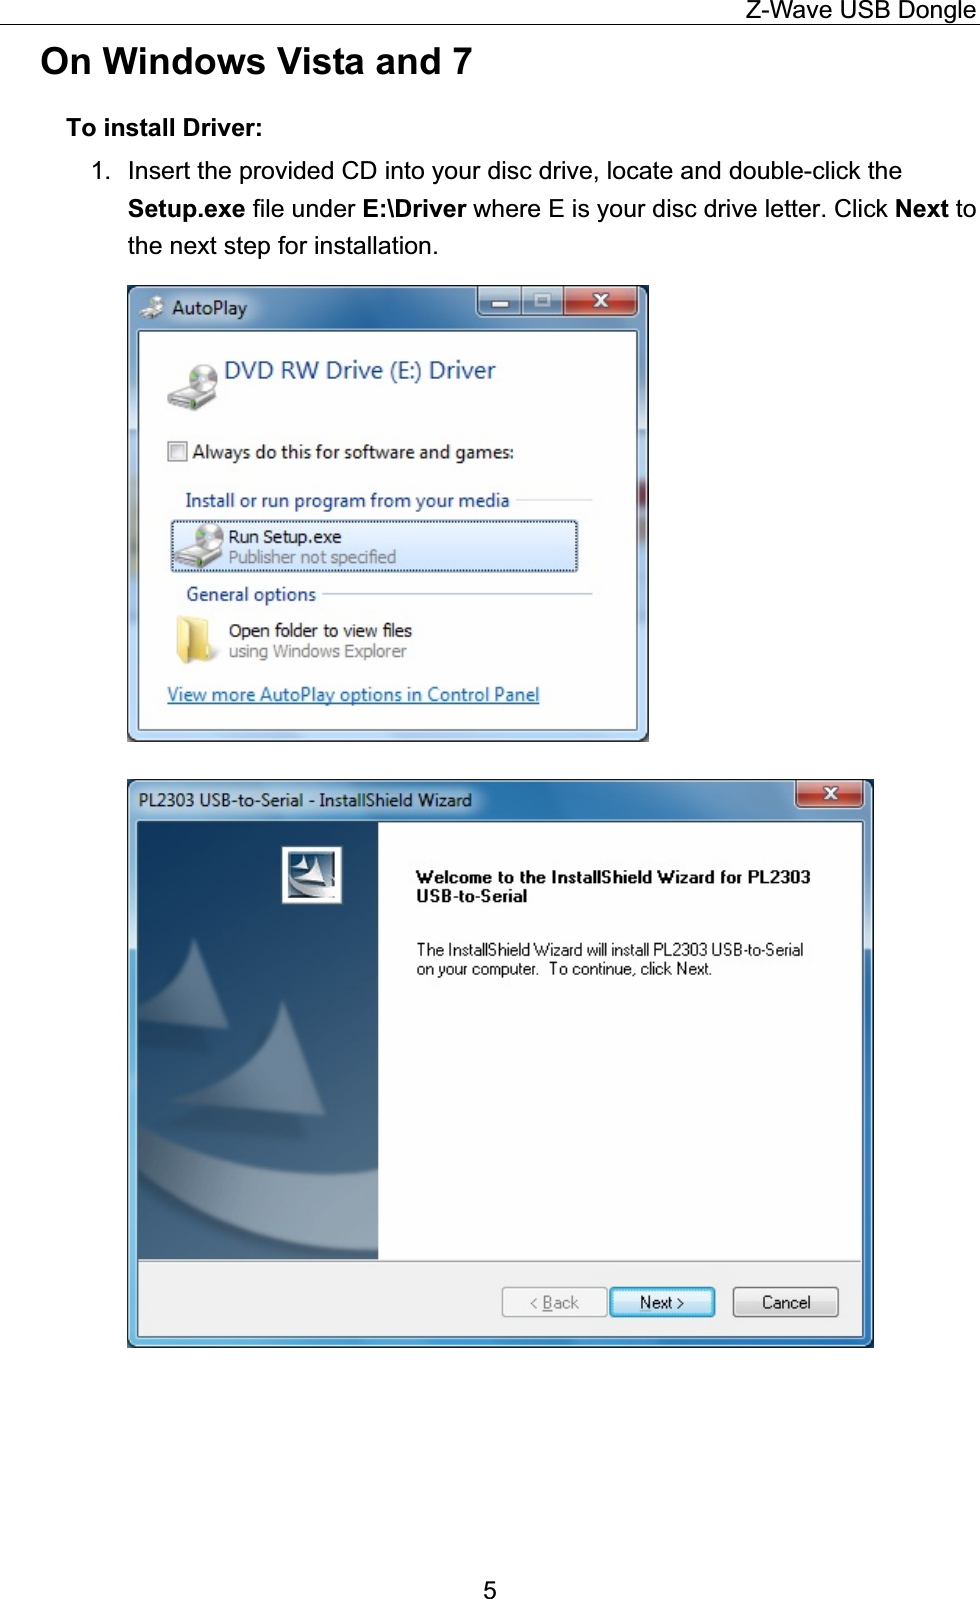                                                                                        Z-Wave USB Dongle        On Windows Vista and 7     To install Driver: 1.  Insert the provided CD into your disc drive, locate and double-click the Setup.exe file under E:\Driver where E is your disc drive letter. Click Next to the next step for installation. 5